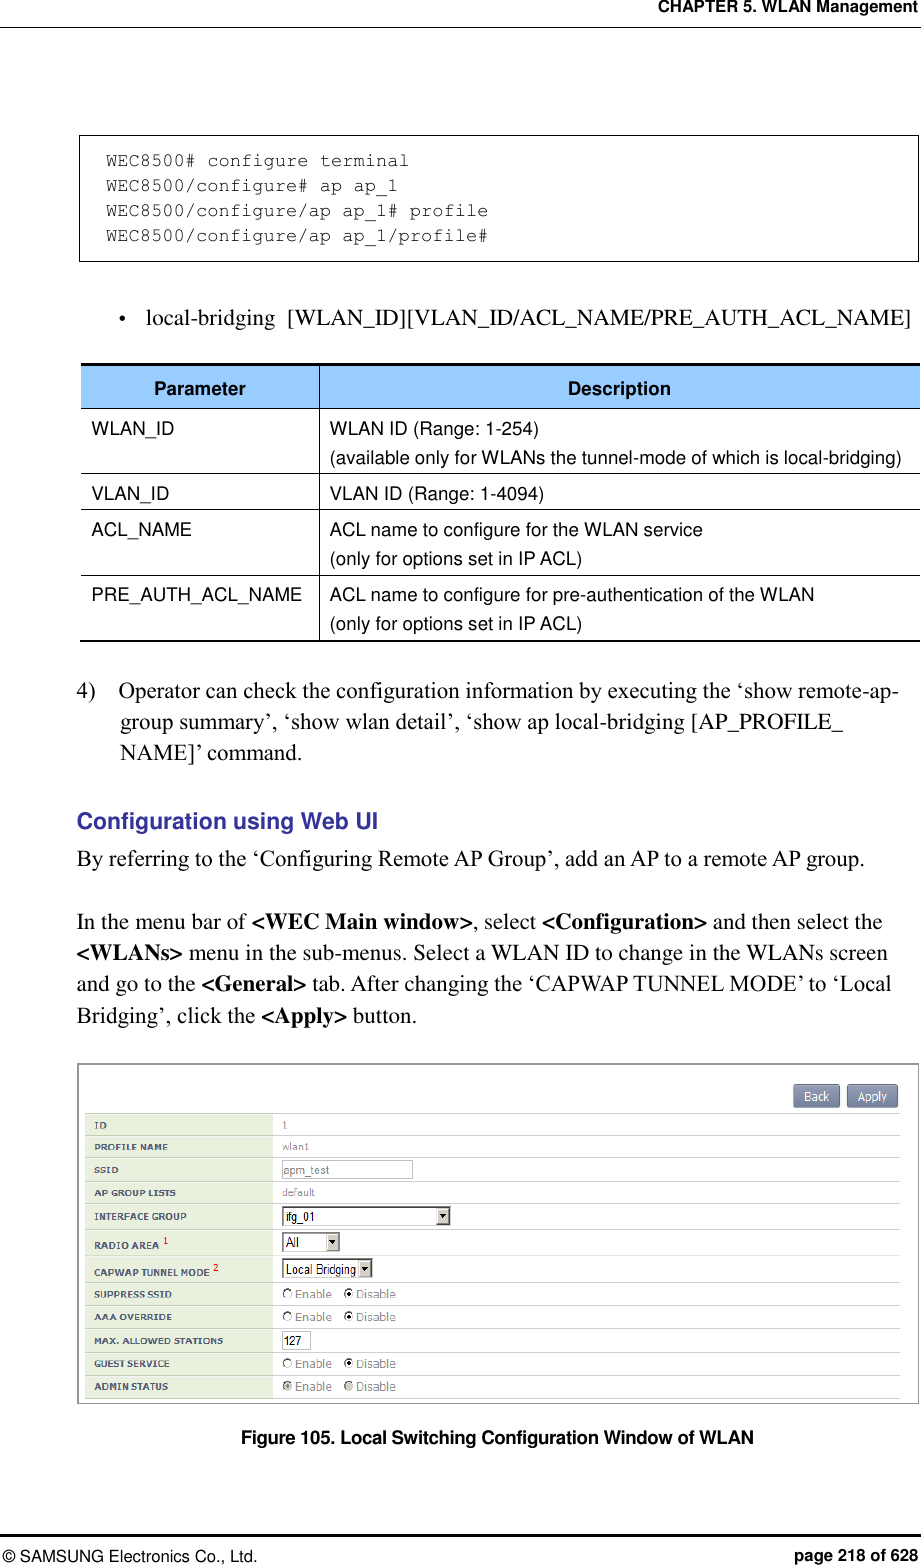 CHAPTER 5. WLAN Management ©  SAMSUNG Electronics Co., Ltd.  page 218 of 628  WEC8500# configure terminal WEC8500/configure# ap ap_1 WEC8500/configure/ap ap_1# profile WEC8500/configure/ap ap_1/profile#   local-bridging  [WLAN_ID][VLAN_ID/ACL_NAME/PRE_AUTH_ACL_NAME]  Parameter Description WLAN_ID WLAN ID (Range: 1-254) (available only for WLANs the tunnel-mode of which is local-bridging) VLAN_ID VLAN ID (Range: 1-4094) ACL_NAME ACL name to configure for the WLAN service (only for options set in IP ACL) PRE_AUTH_ACL_NAME ACL name to configure for pre-authentication of the WLAN (only for options set in IP ACL)  4)    Operator can check the configuration information by executing the ‘show remote-ap-group summary’, ‘show wlan detail’, ‘show ap local-bridging [AP_PROFILE_ NAME]’ command.    Configuration using Web UI By referring to the ‘Configuring Remote AP Group’, add an AP to a remote AP group.  In the menu bar of &lt;WEC Main window&gt;, select &lt;Configuration&gt; and then select the &lt;WLANs&gt; menu in the sub-menus. Select a WLAN ID to change in the WLANs screen and go to the &lt;General&gt; tab. After changing the ‘CAPWAP TUNNEL MODE’ to ‘Local Bridging’, click the &lt;Apply&gt; button.  Figure 105. Local Switching Configuration Window of WLAN  